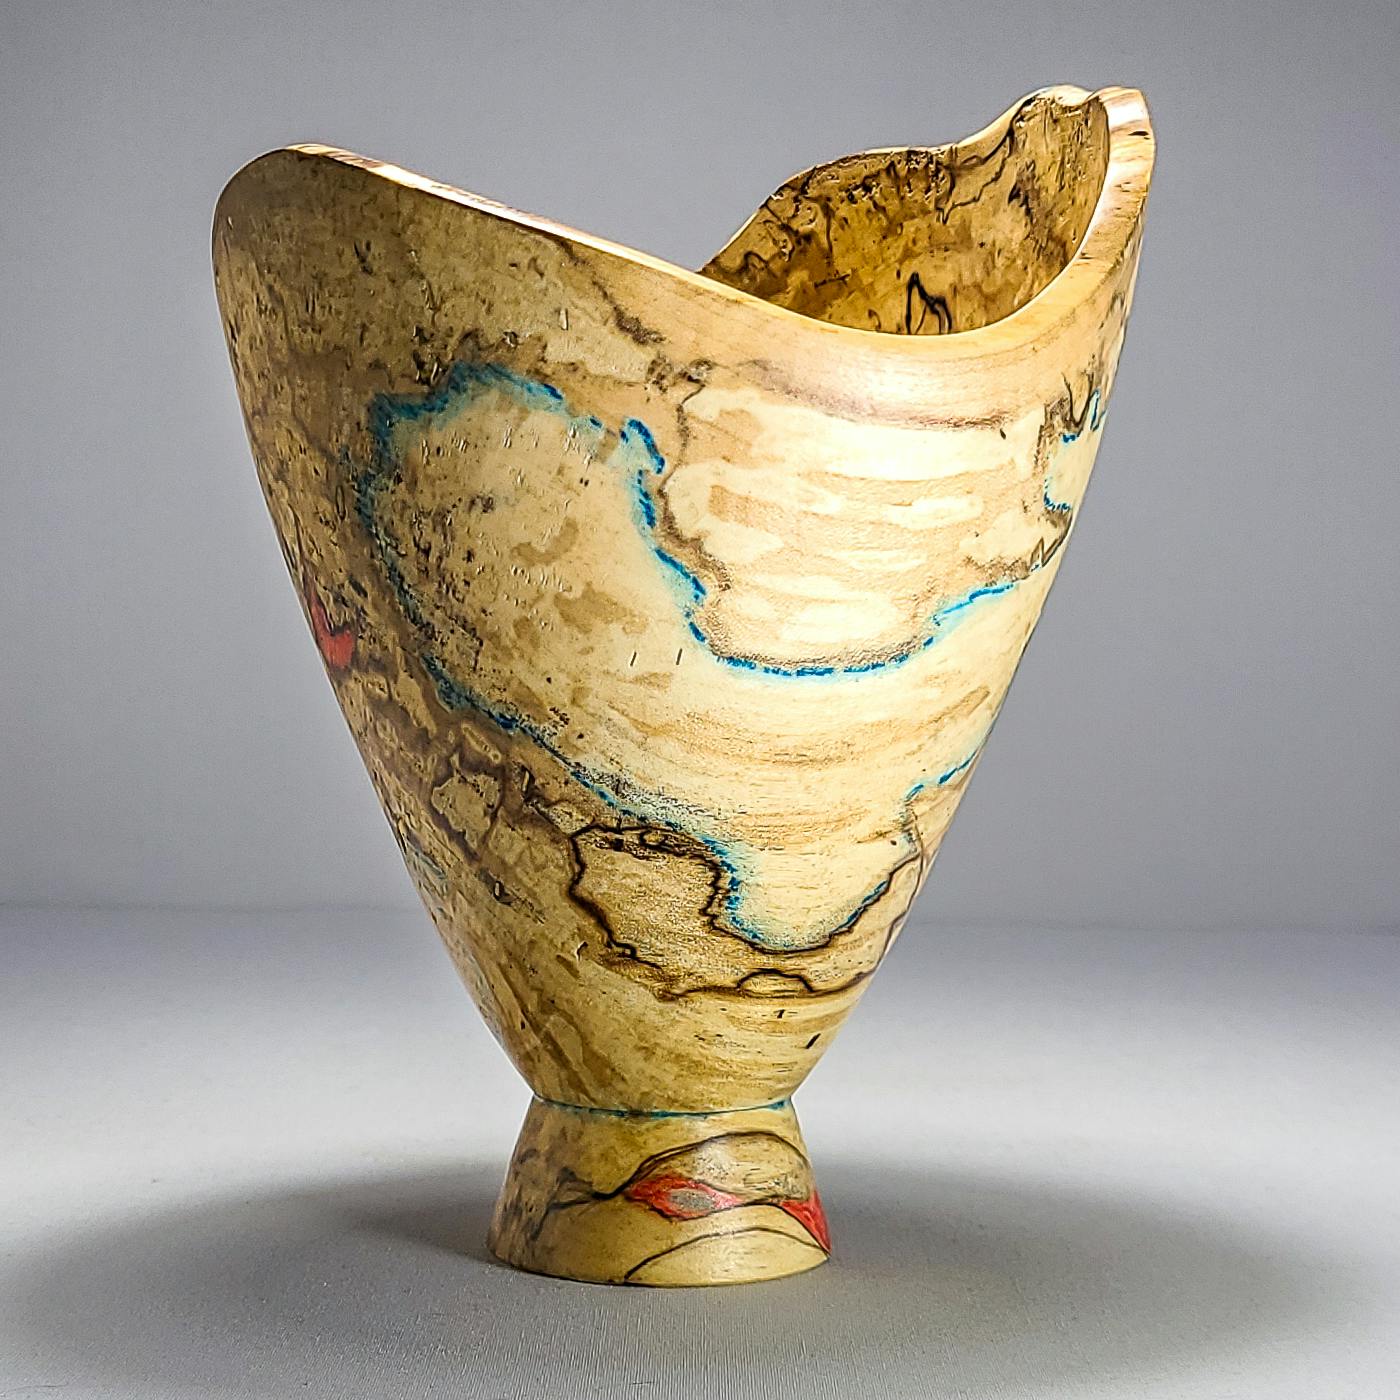 wooden vessel with subtle red and teal coloration in grain